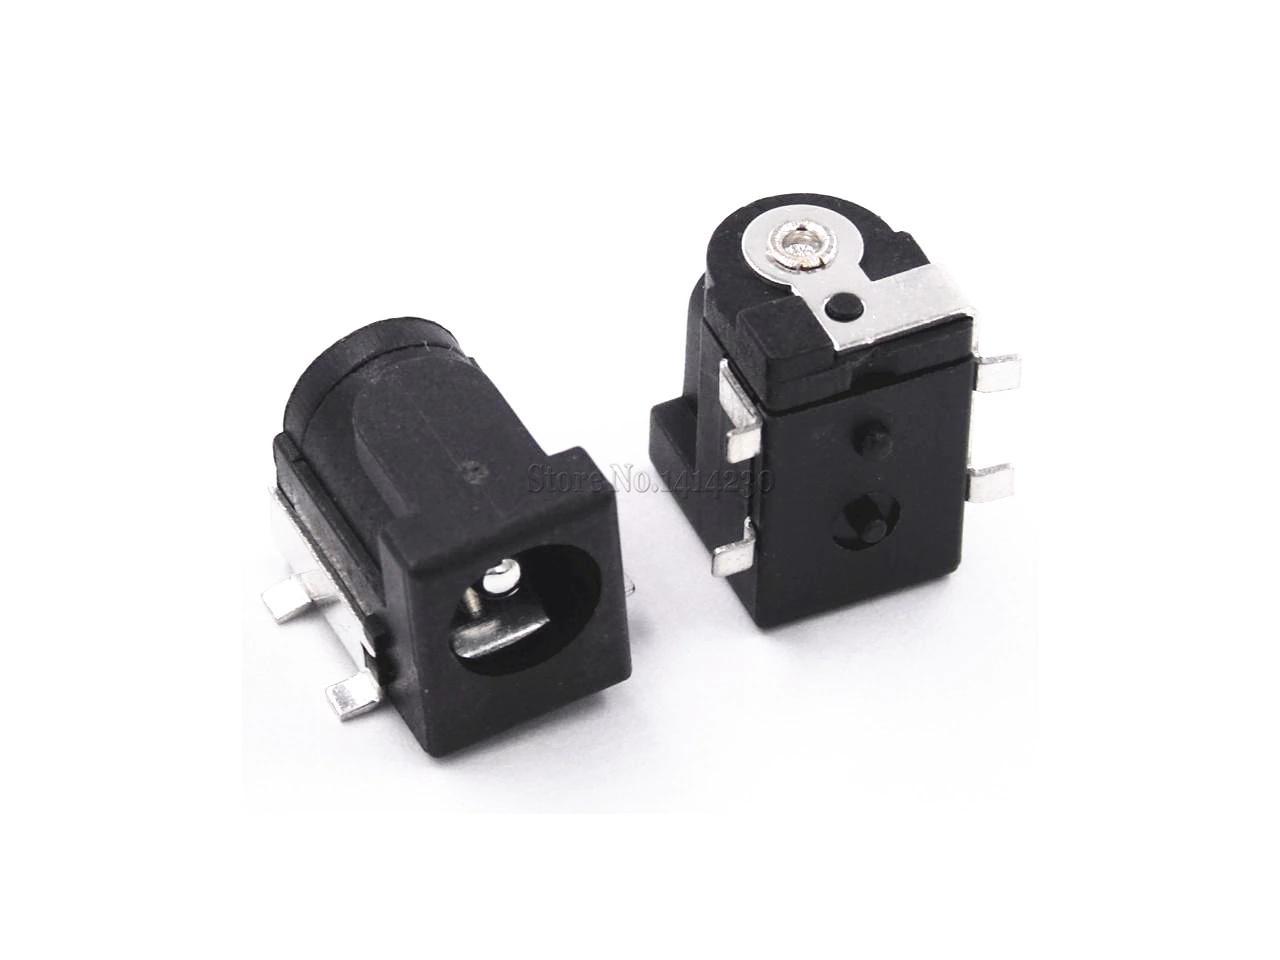 20 Pcs DC power outlet Female Charger Power socket 4 Pin SMT DC-050 